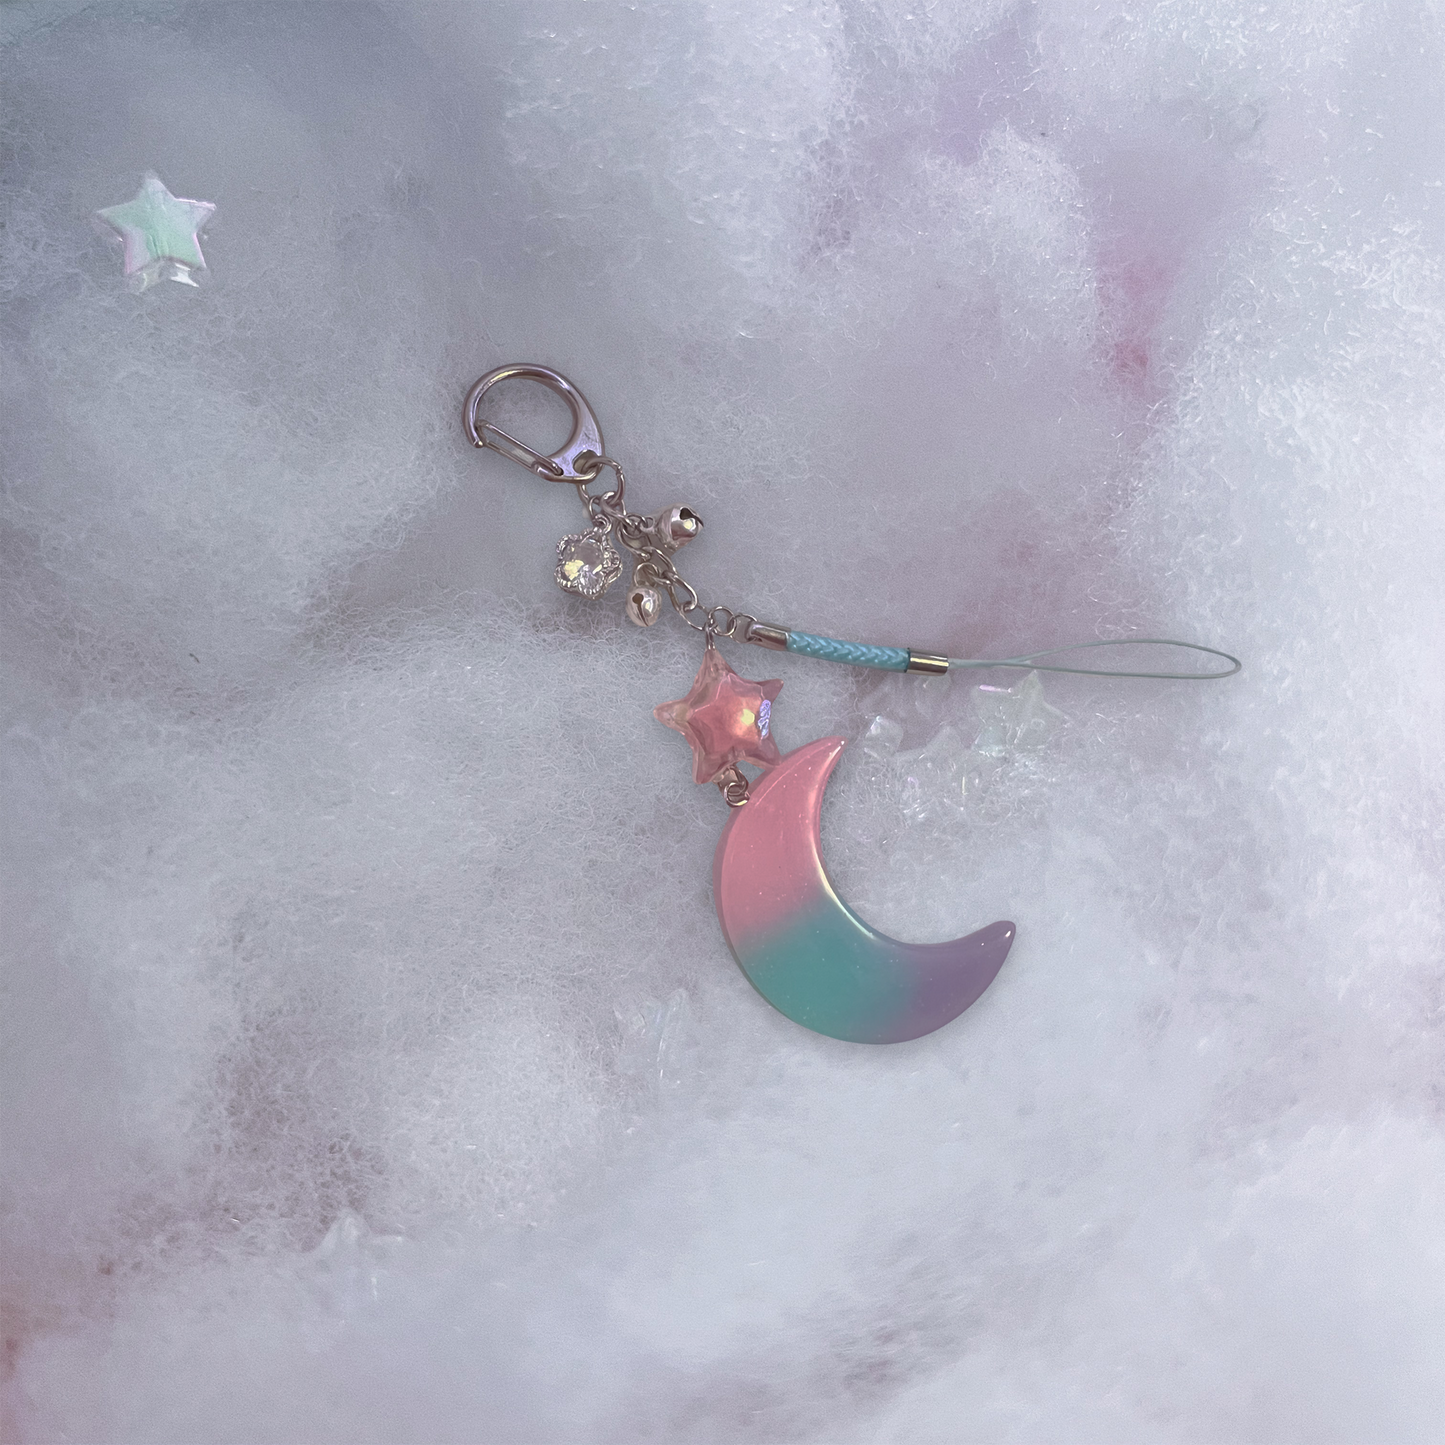 Specialty keychain featuring a sparkly resin moon charm with pastel colors and connecting star charm, with small bells and crystal flower charm and braided phone strap.